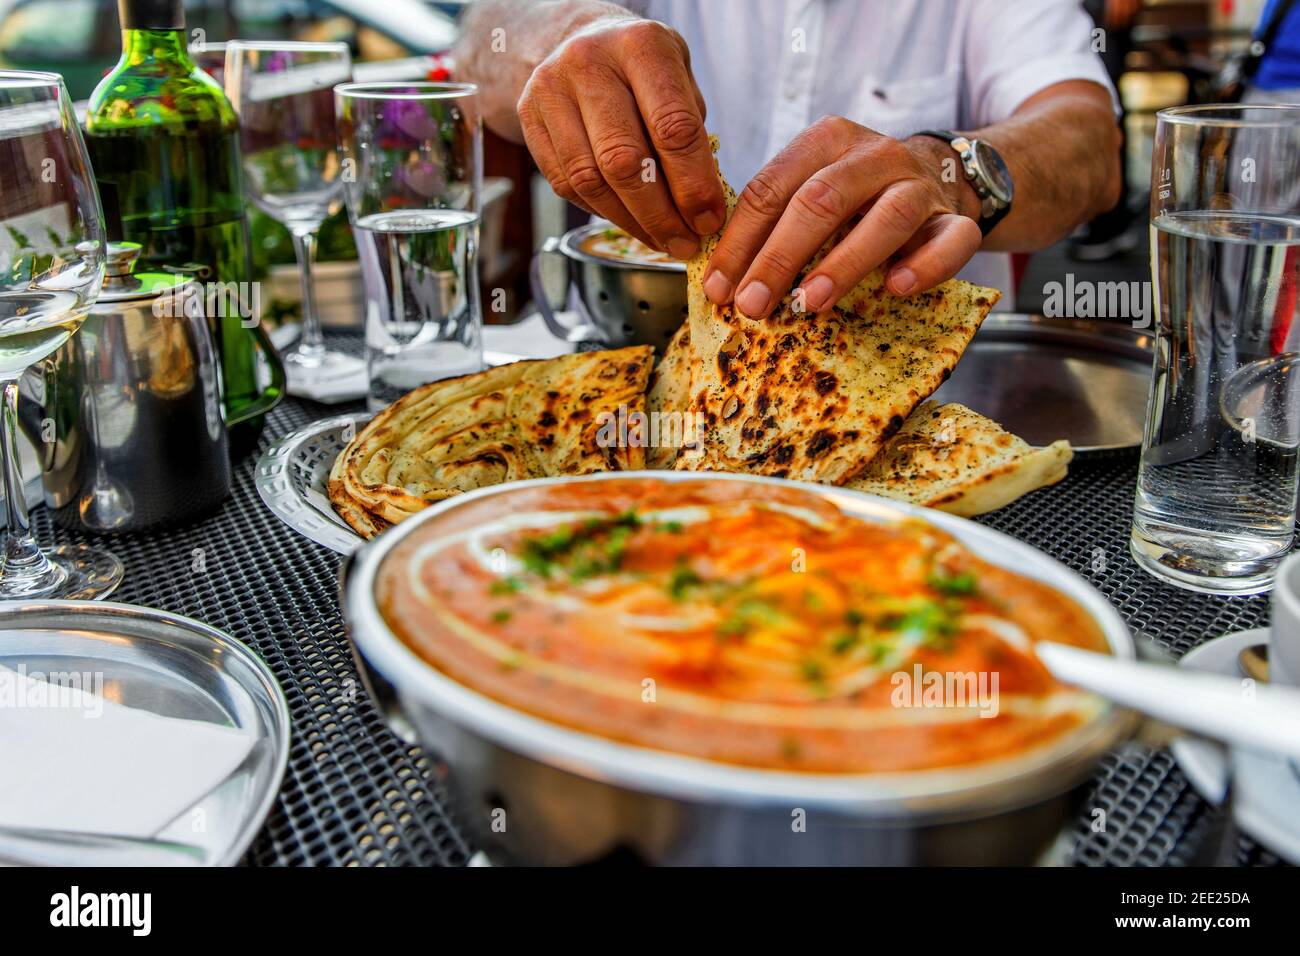 Hands of man tearing bread (butter naan) at the table with indian meals, glasses of water and wine, jug with tea, outdoor in indian restaurant. Stock Photo